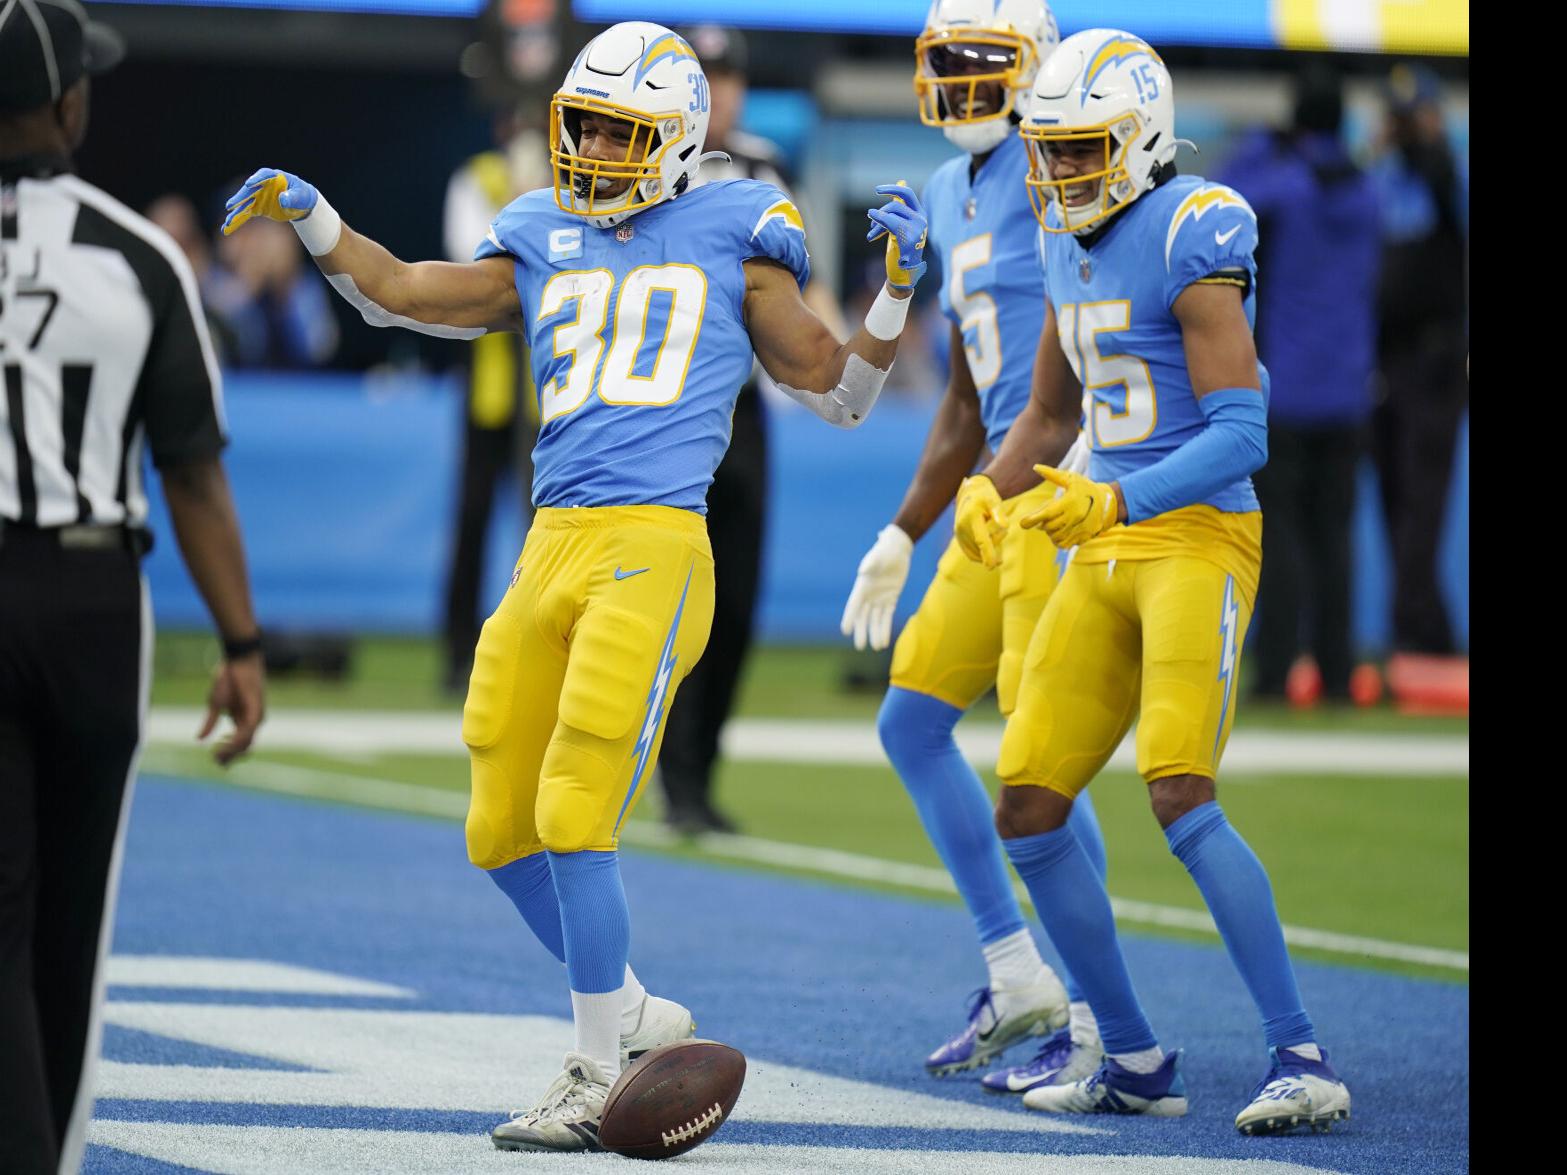 NFL Roundup: Chargers aim for AFC West title by emphasizing